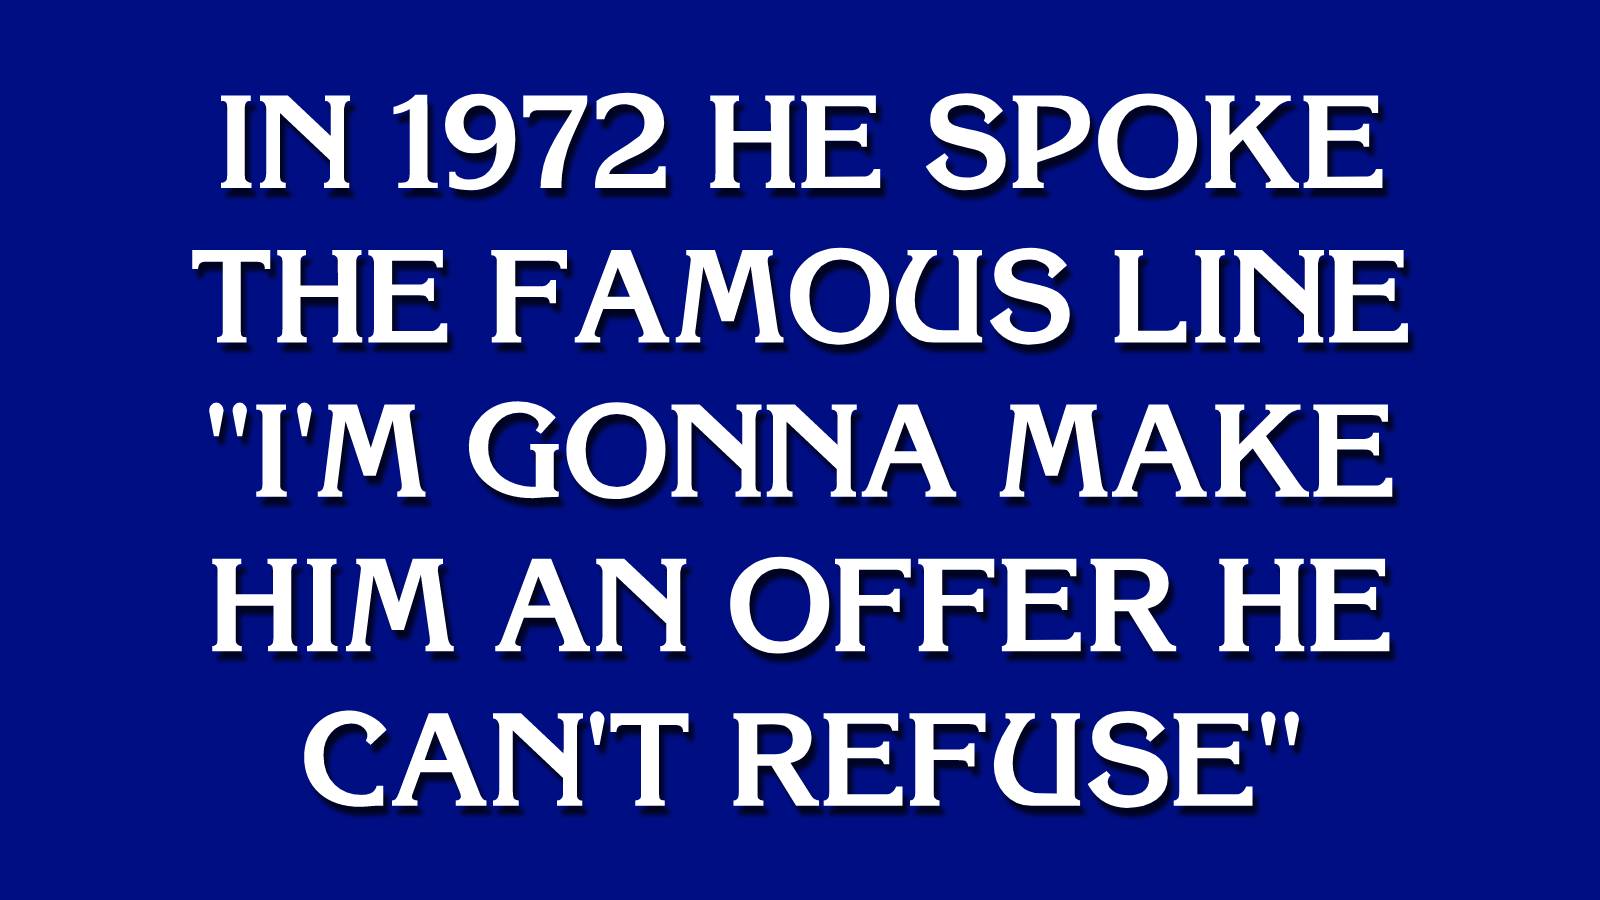 Do You Have the Smarts to Win This Game of “Jeopardy!”? Template Jeopardy 51